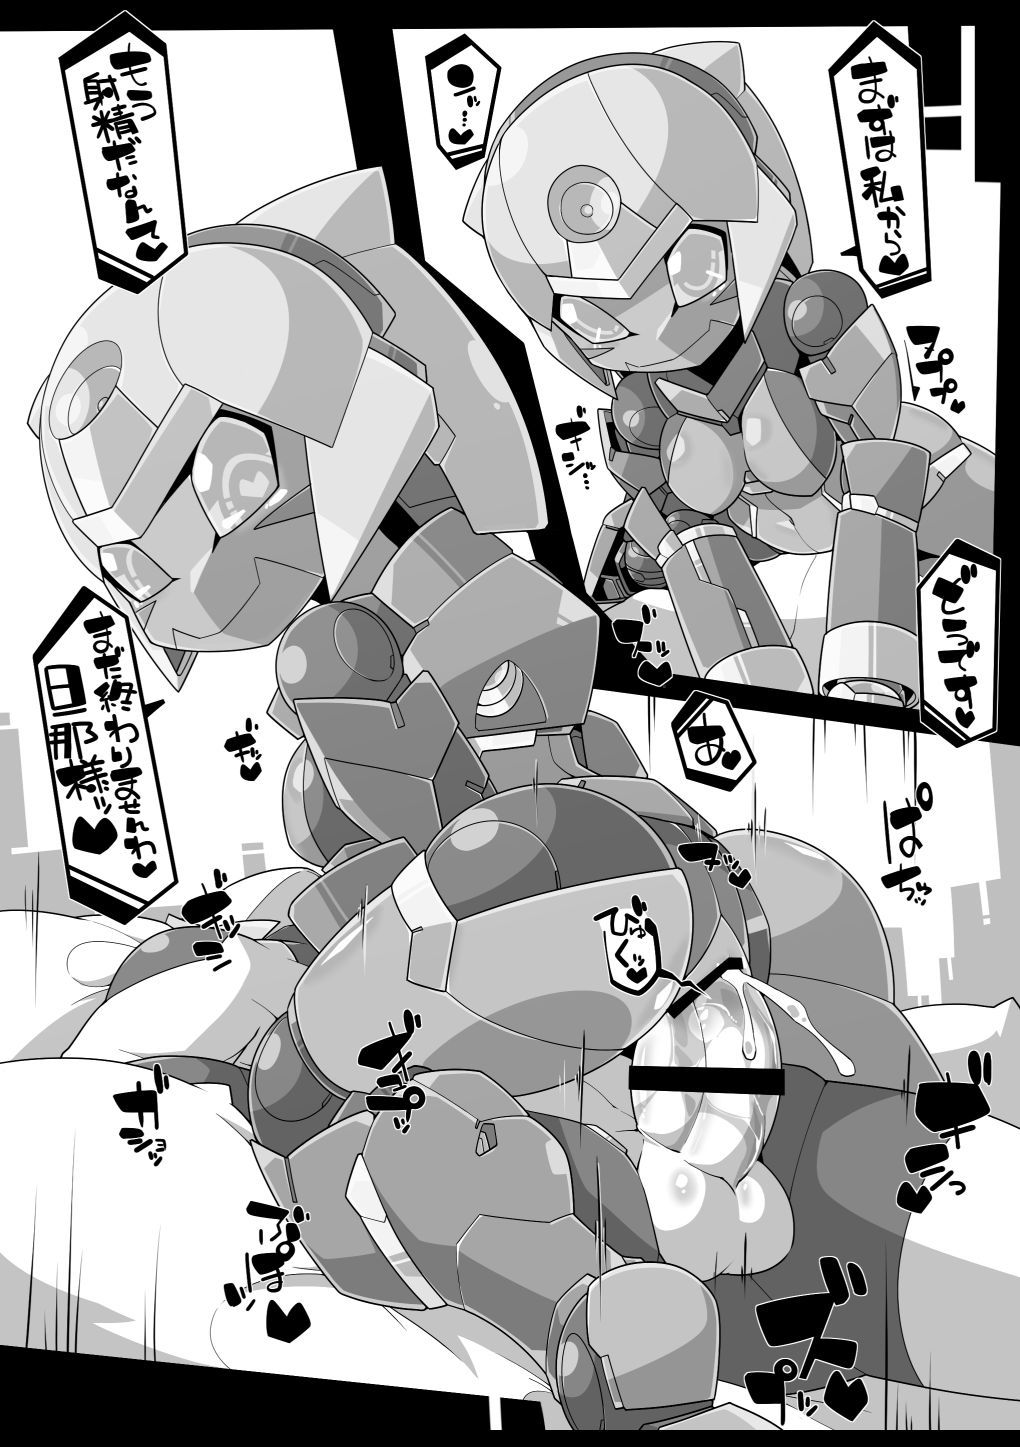 [Pixiv] kni-droid (Kにぃー, weis2626) (Pixiv ID: 1937581) 99